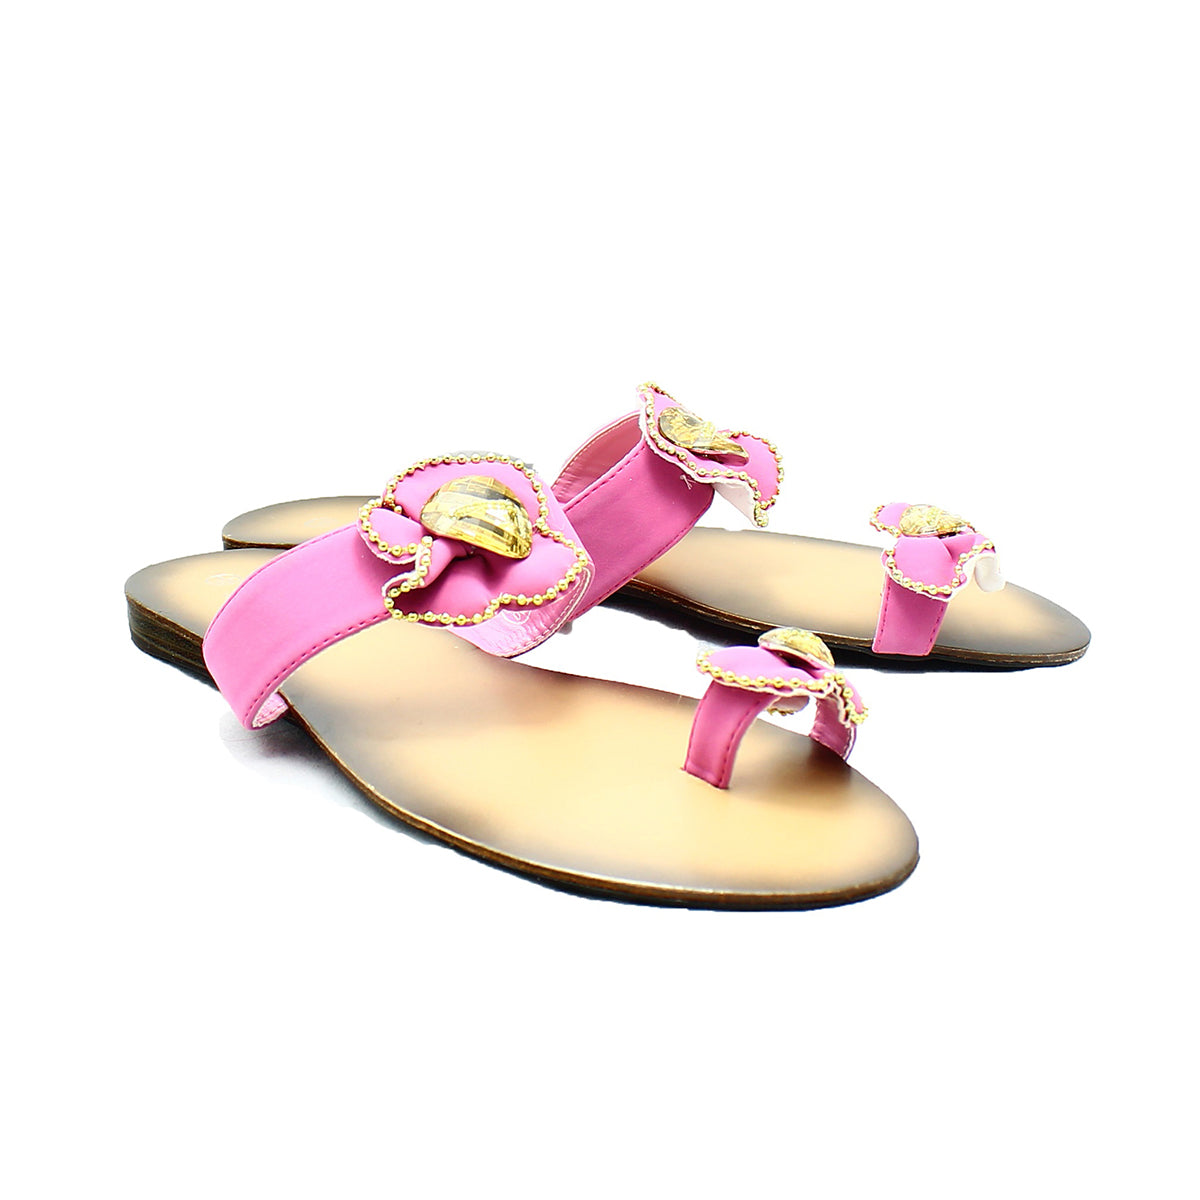 Pink Flat sandals with gold edging and toe ring